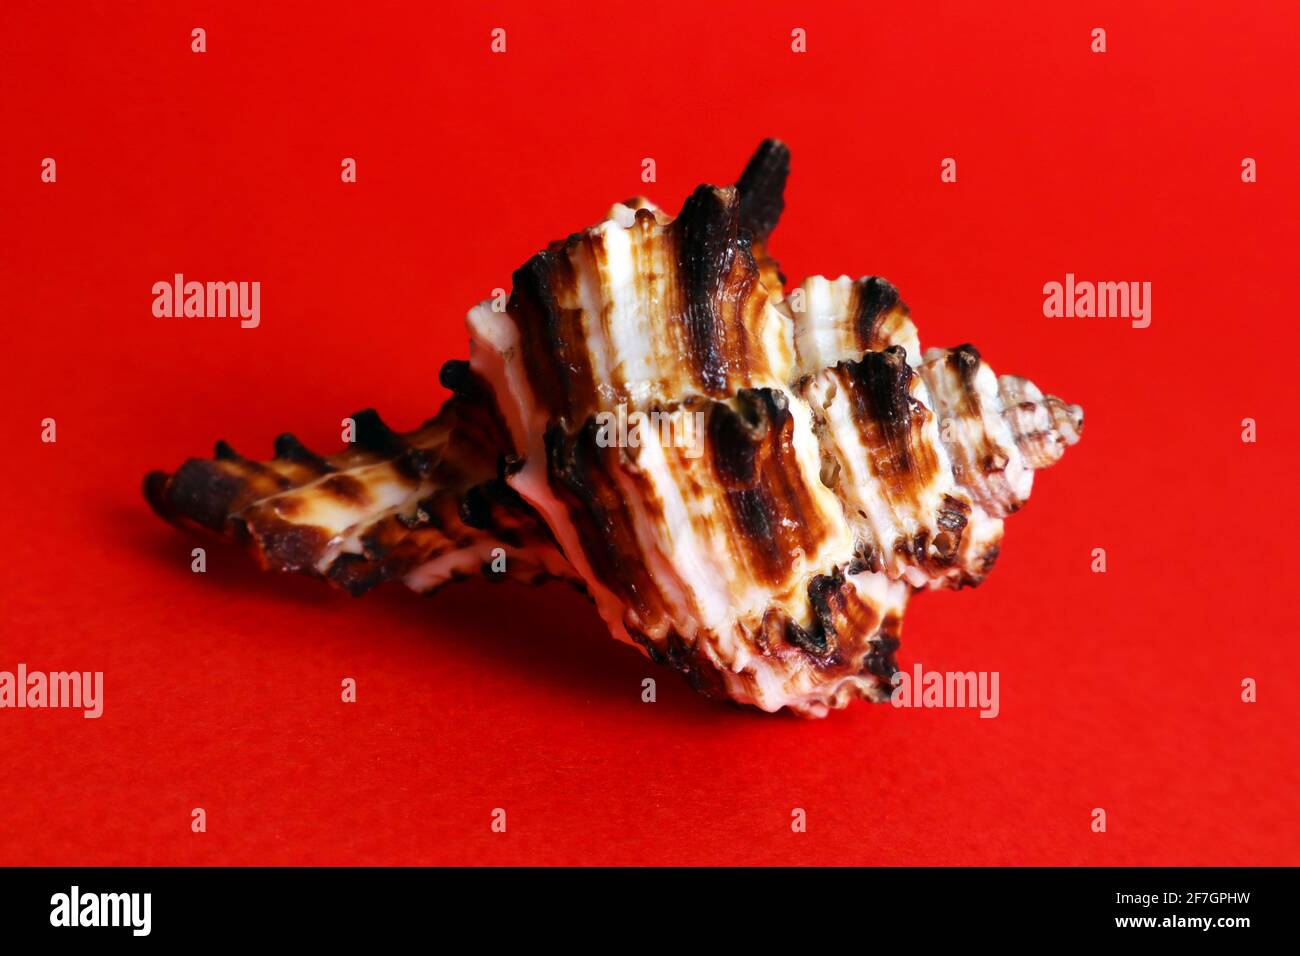 Beautiful sea shell with thorns close up against bright red background Stock Photo